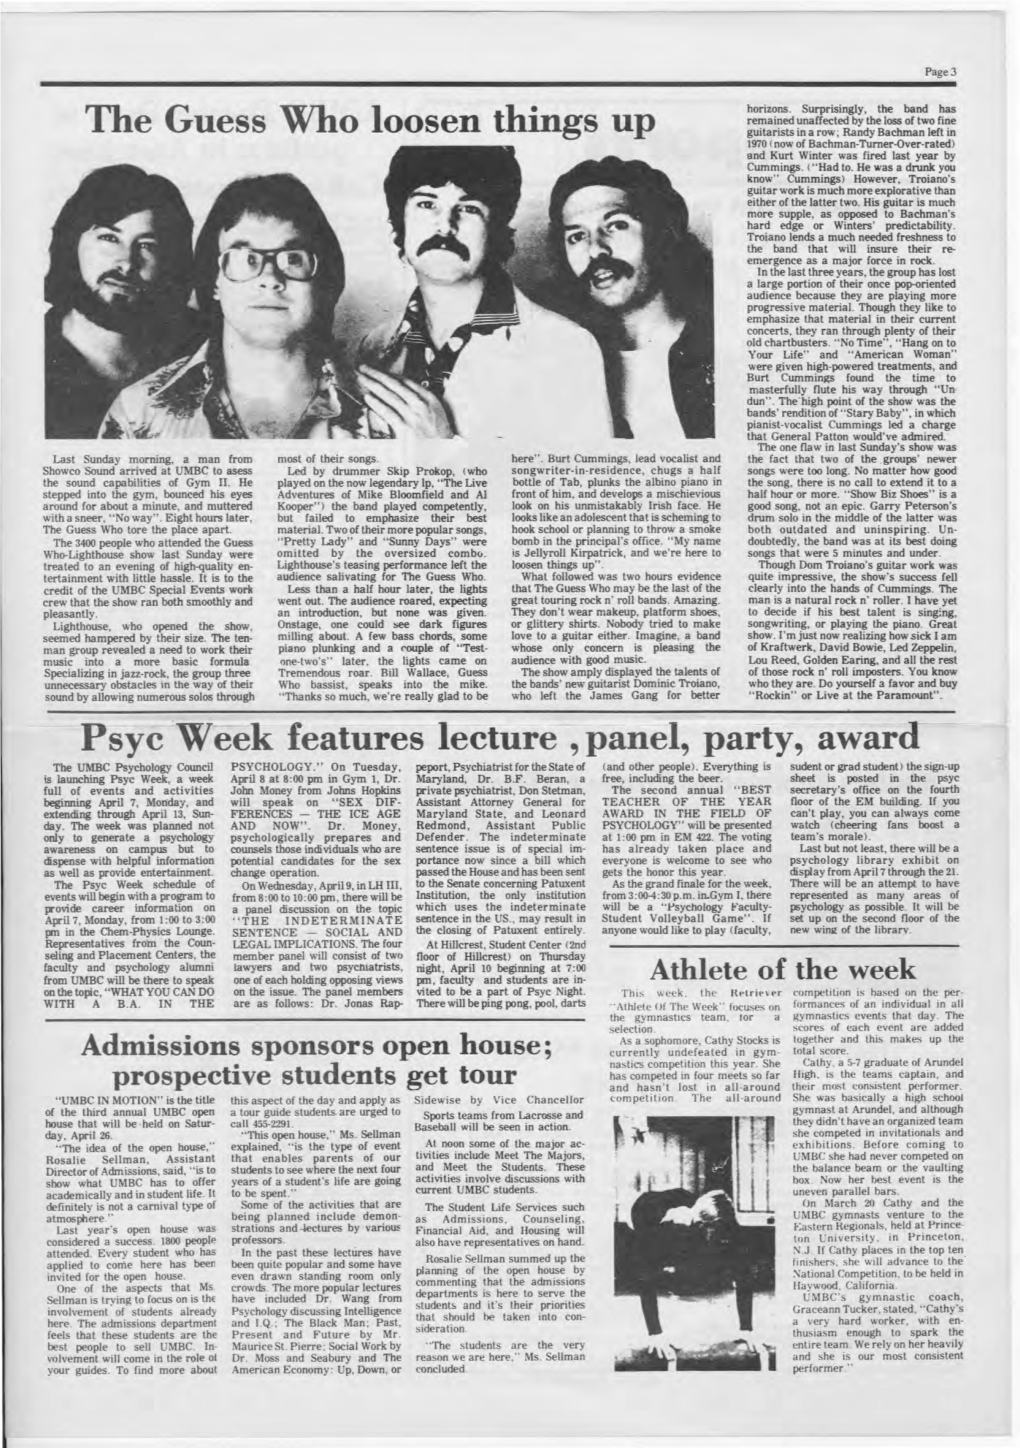 The Guess Who Loosen Things up Psyc ~Week-Features Lecture, Panel